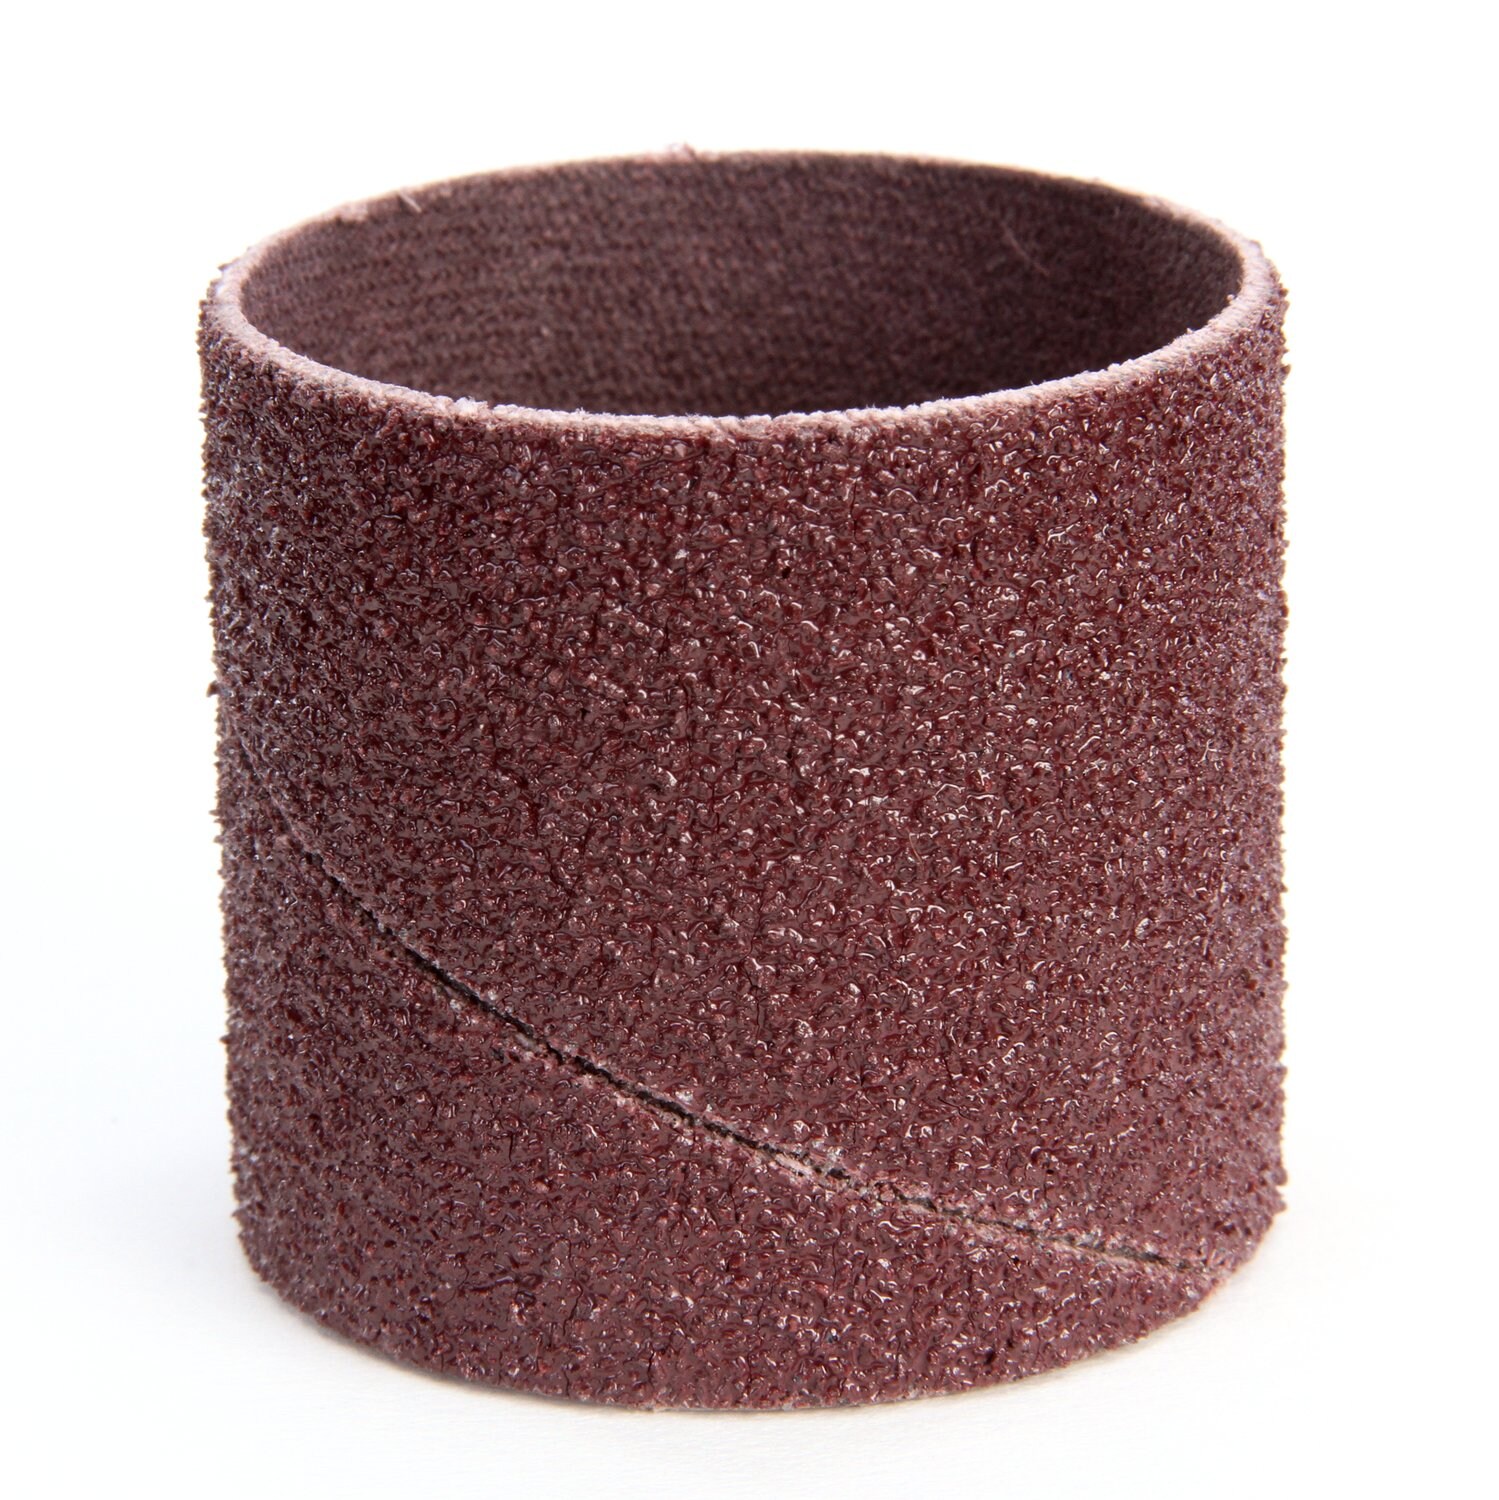 7100138149 - 3M Cloth Spiral Band 341D, 36 X-weight, 1-1/2 in x 1-1/2 in, 100
ea/Case